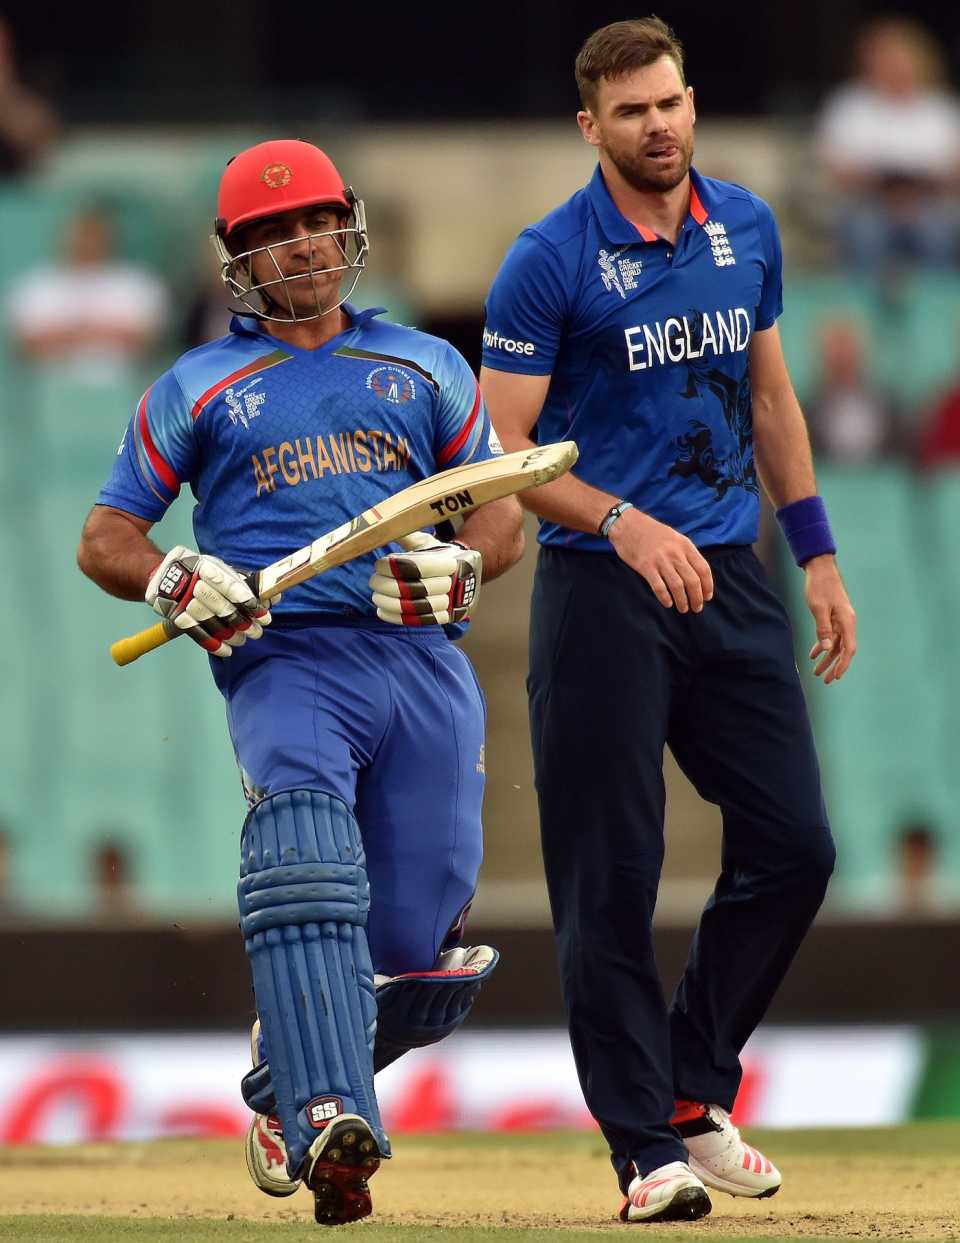 James Anderson looks disappointed at having given away a run, Afghanistan v England, World Cup 2015, Group A, Sydney, March 13, 2015